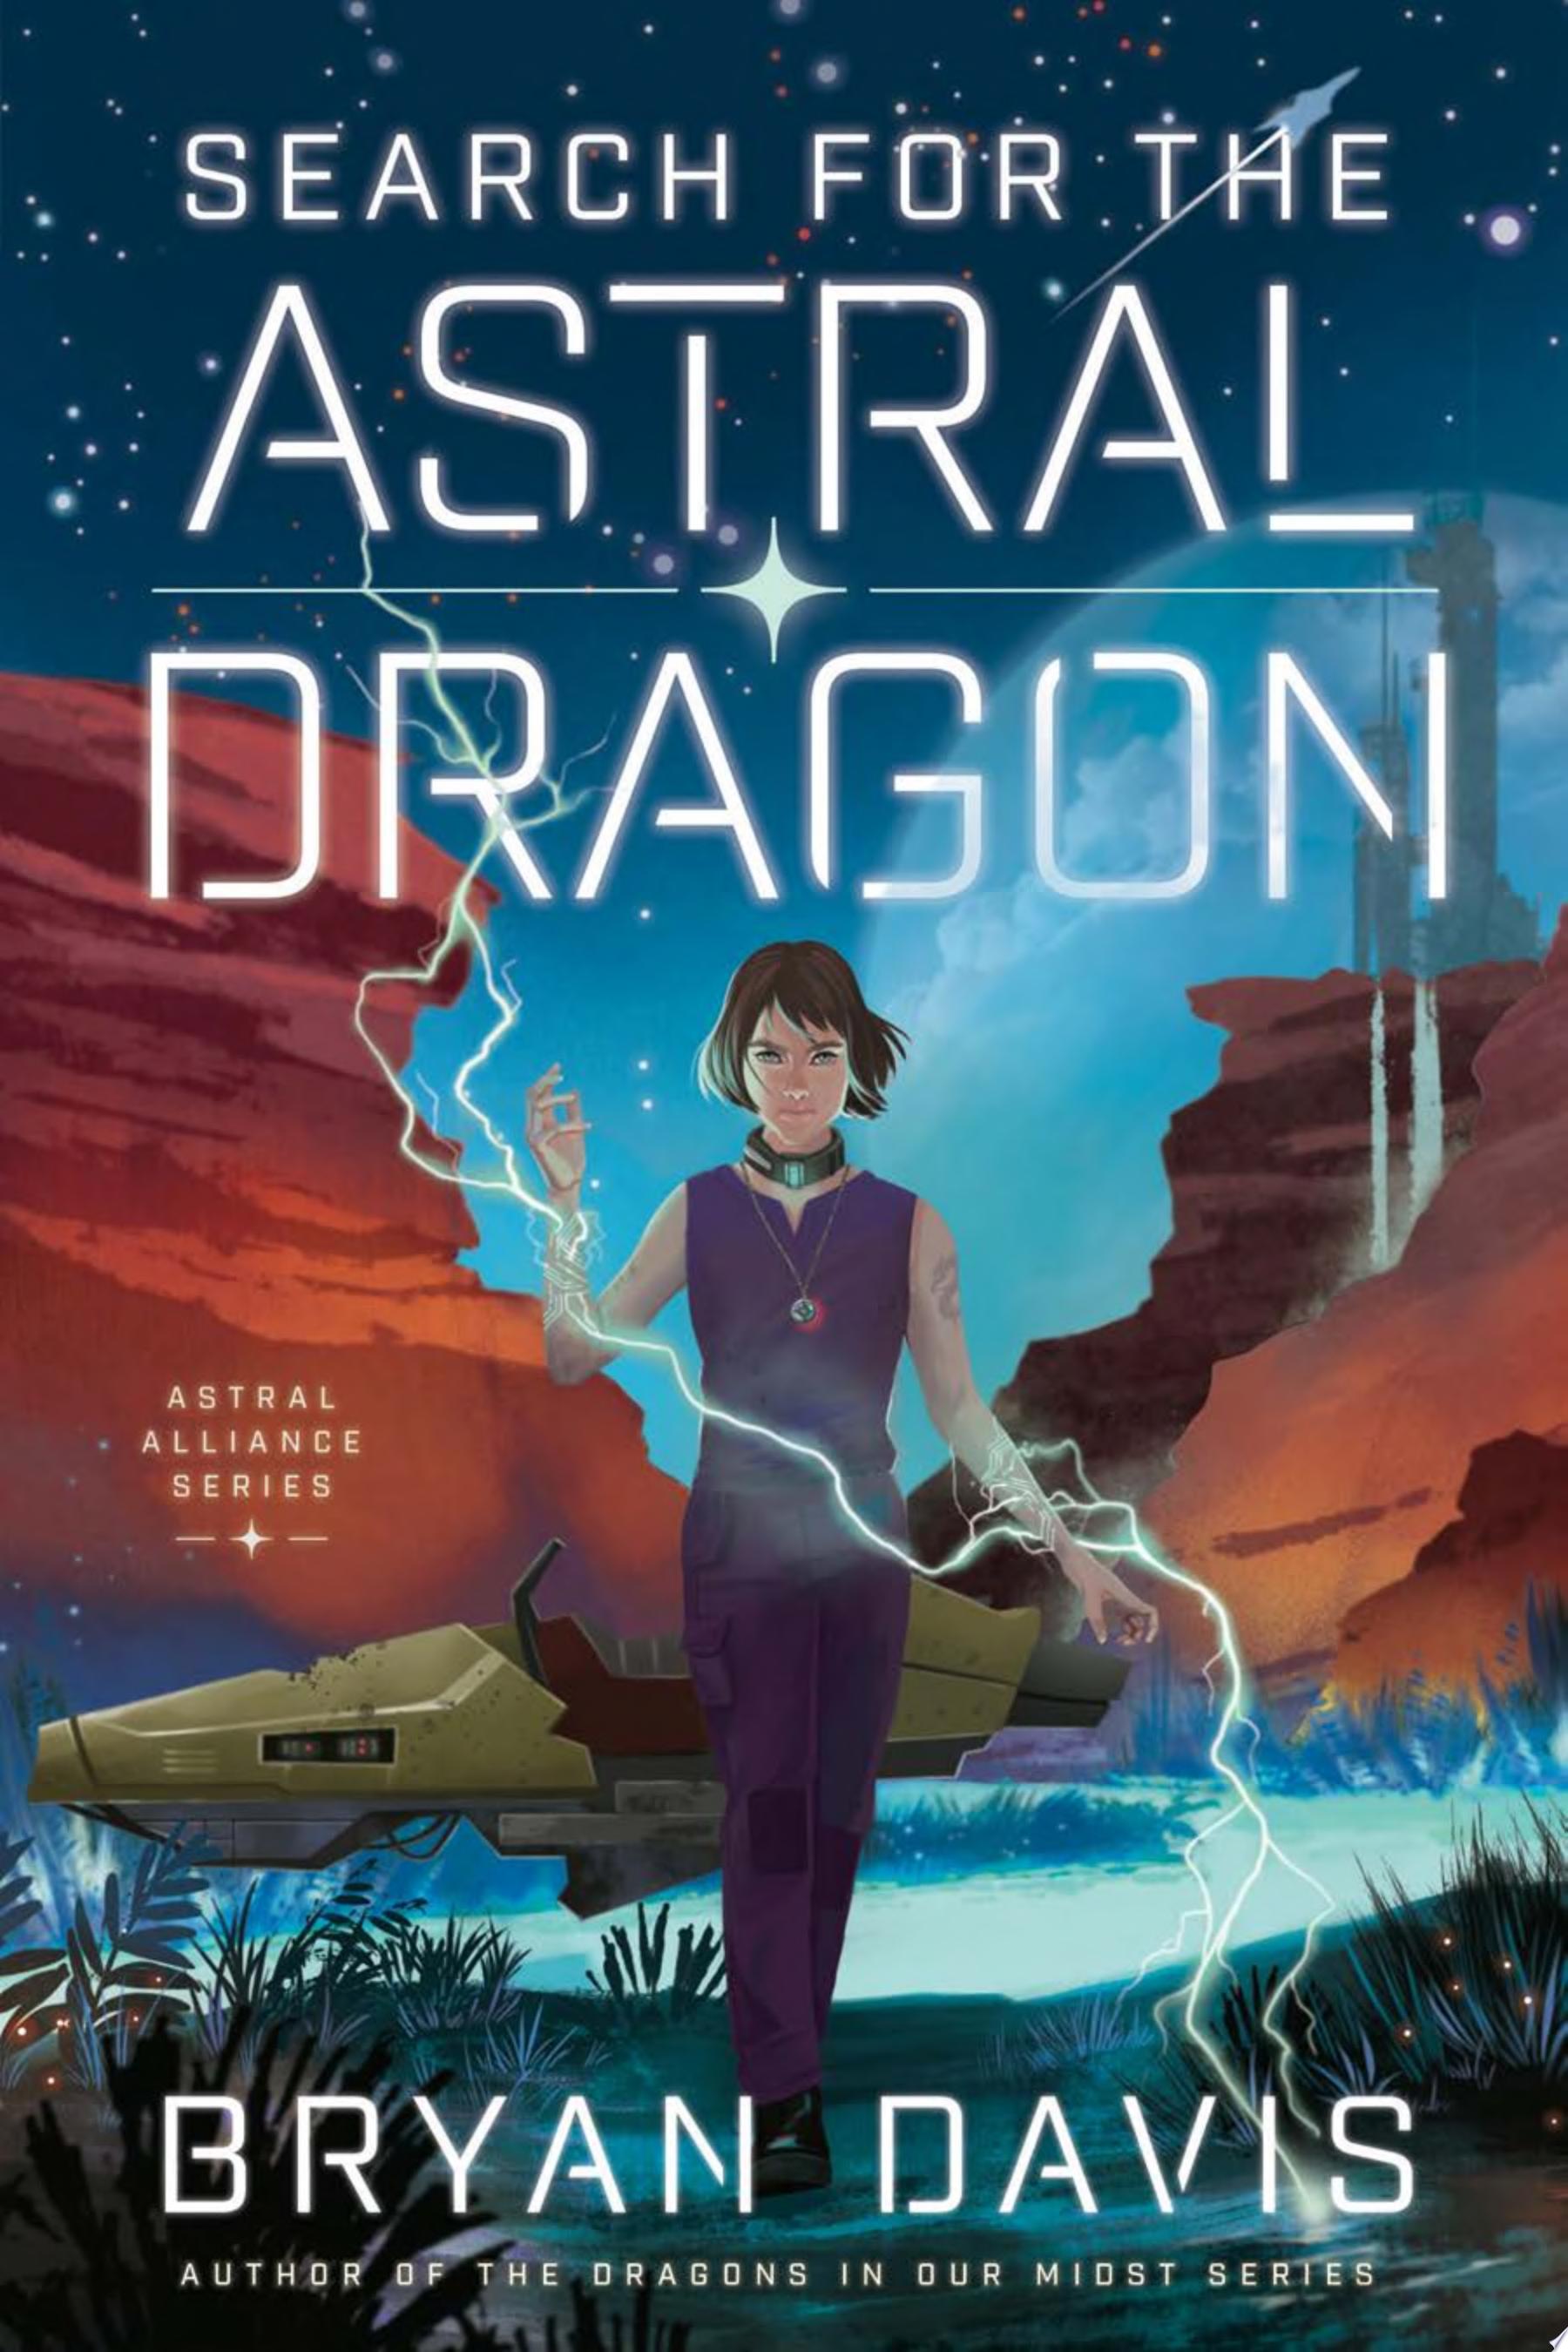 Image for "Search for the Astral Dragon"